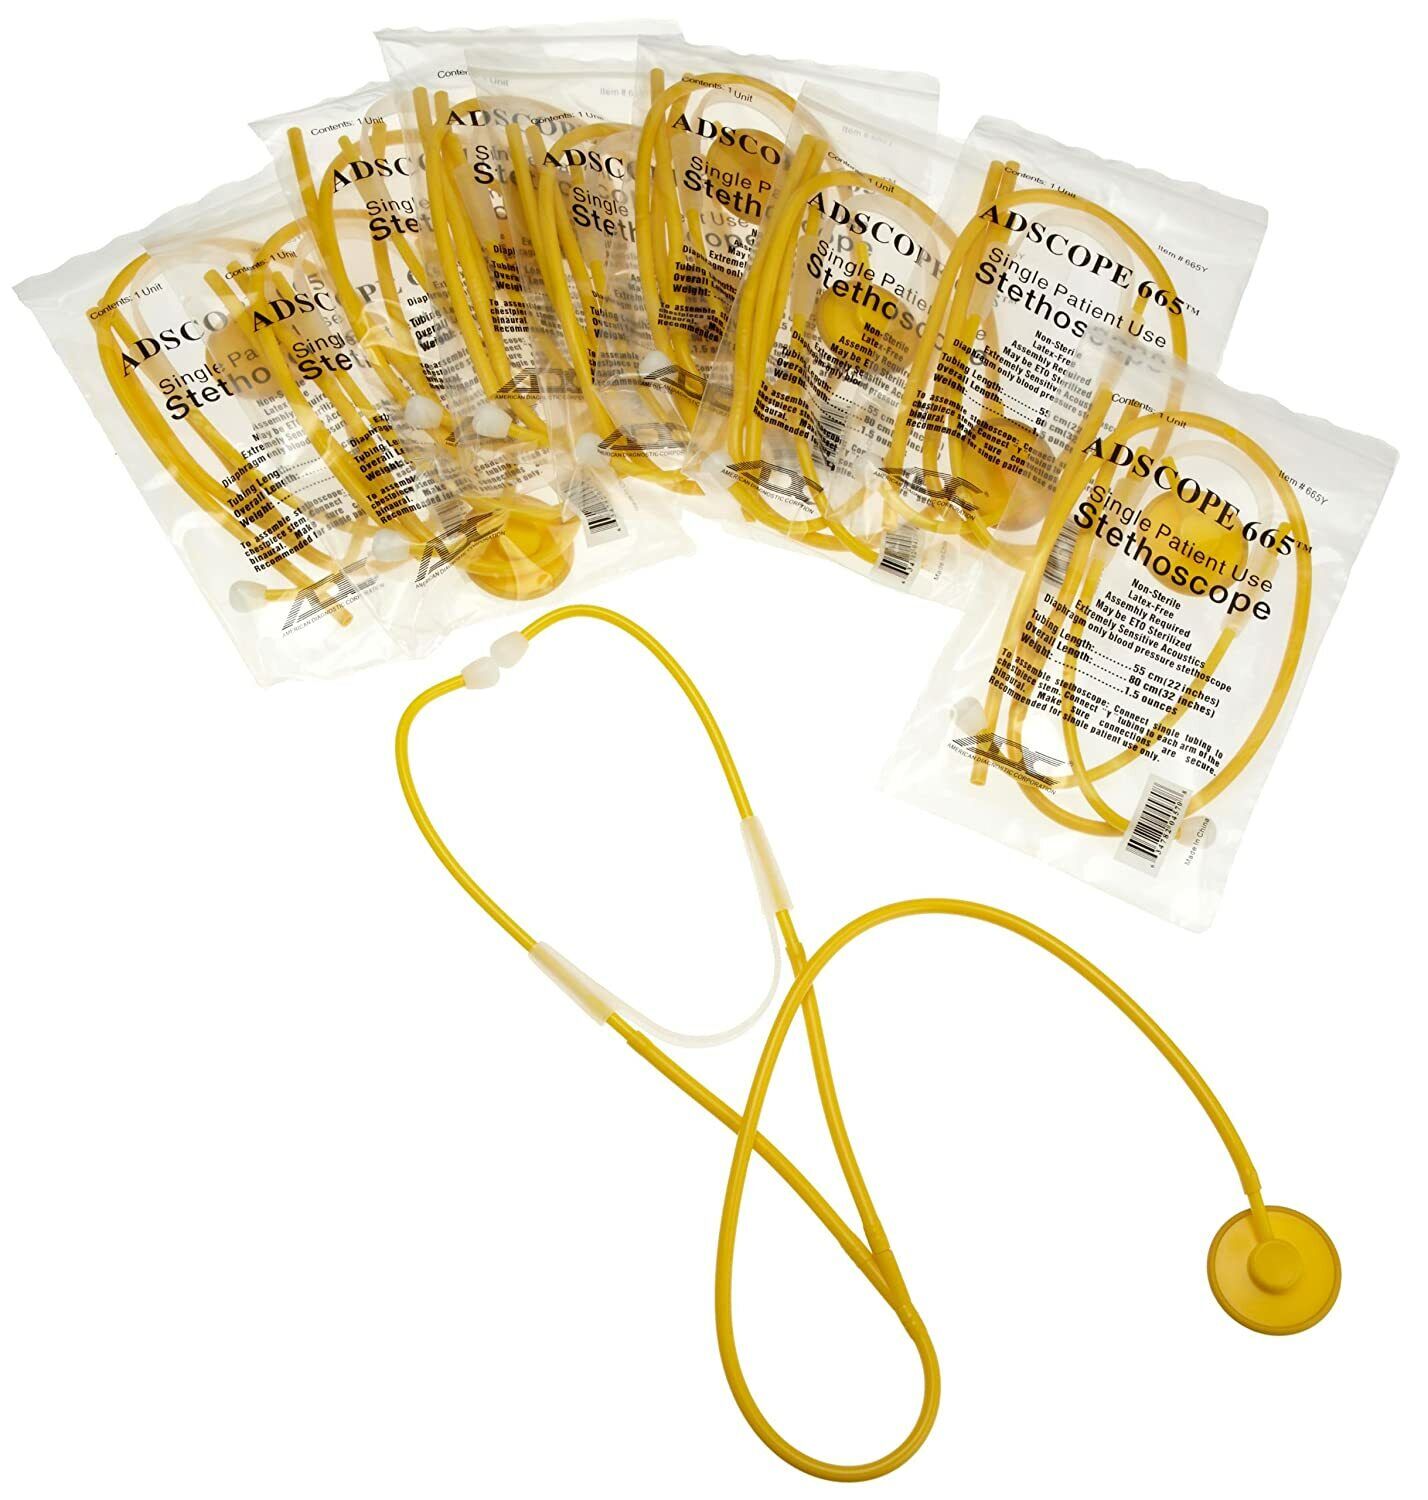 Finally Max 72% OFF popular brand ADC Proscope 665Y-10 Disposable Stethoscope Adult Diaphragm Onl